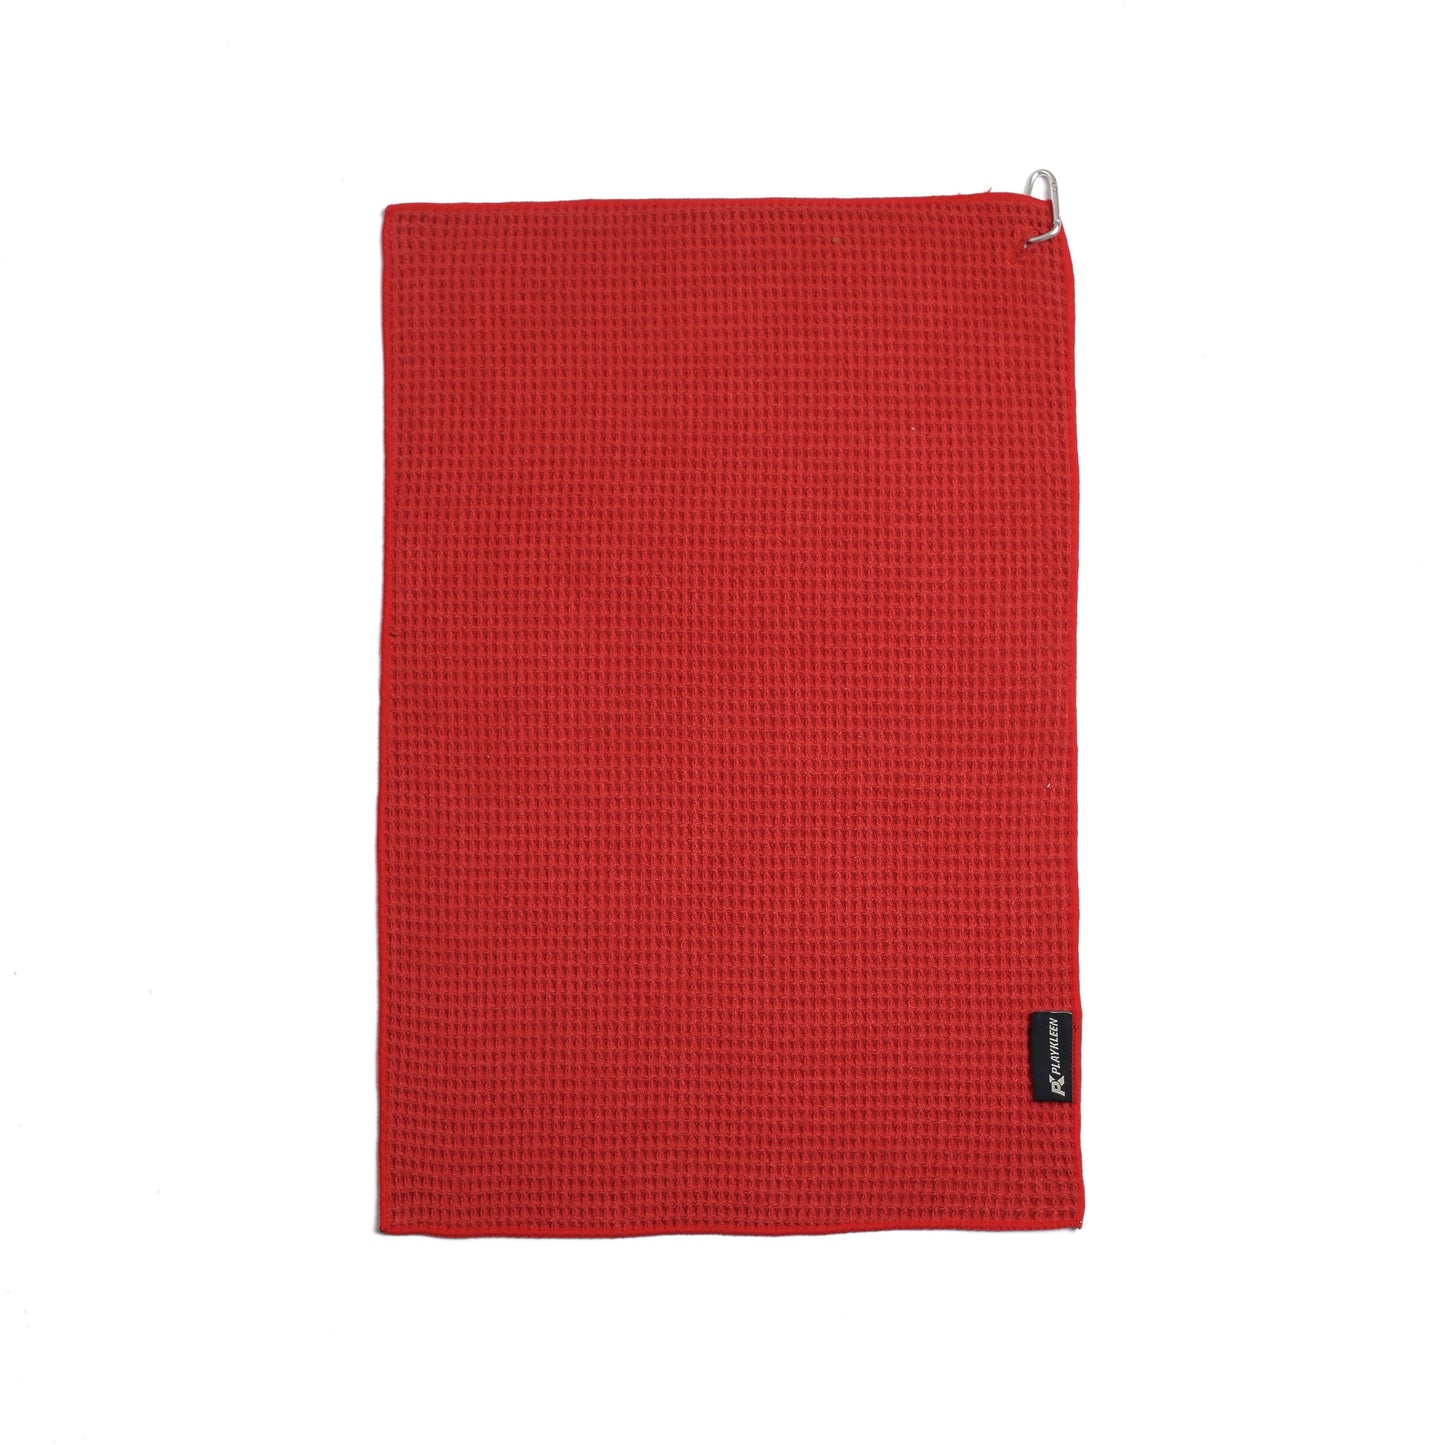 The Perfect PlayKleen Golf Towel